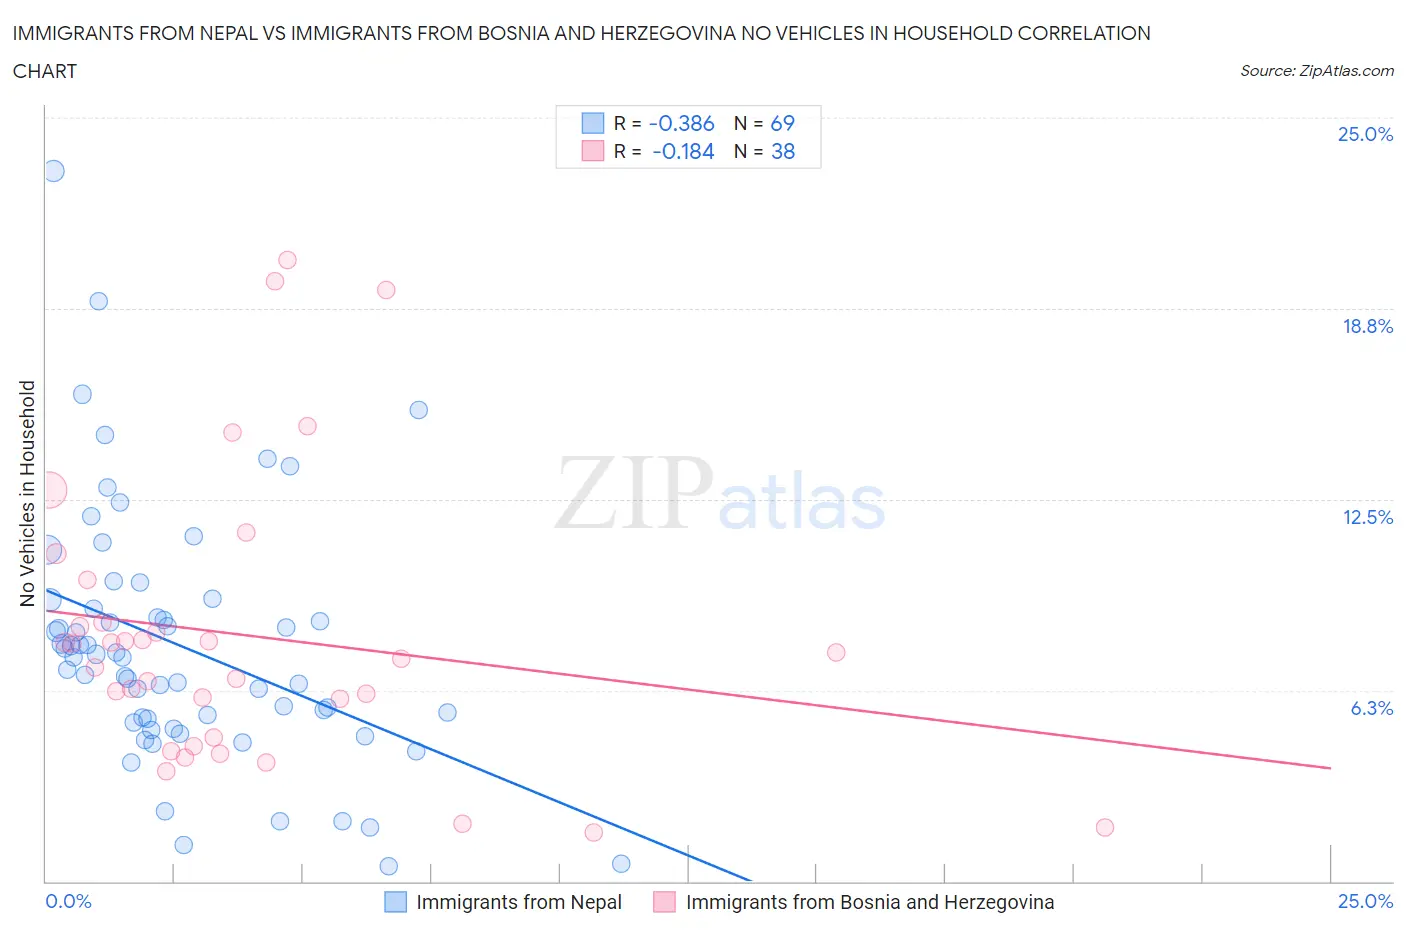 Immigrants from Nepal vs Immigrants from Bosnia and Herzegovina No Vehicles in Household